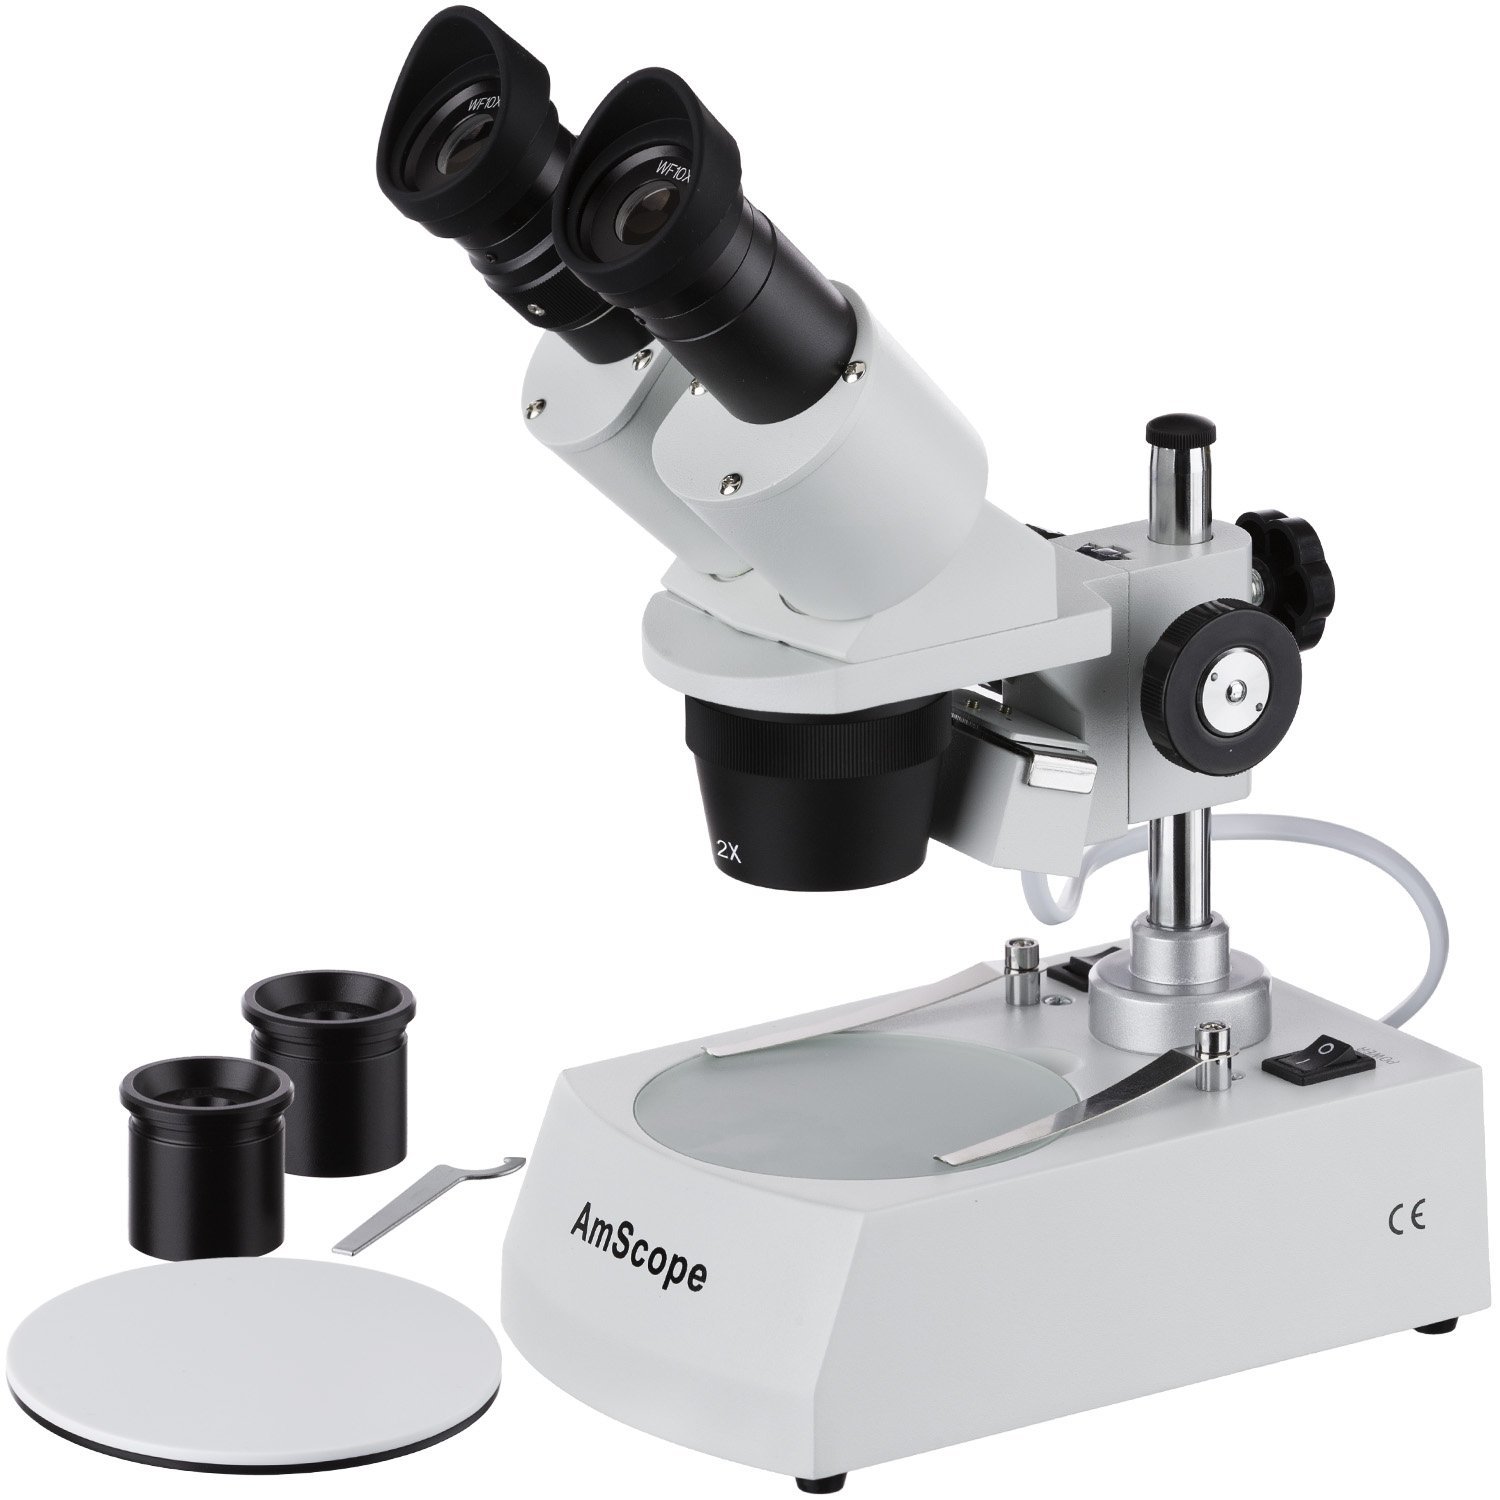 Metallurgical Microscope Buyer’s Guide